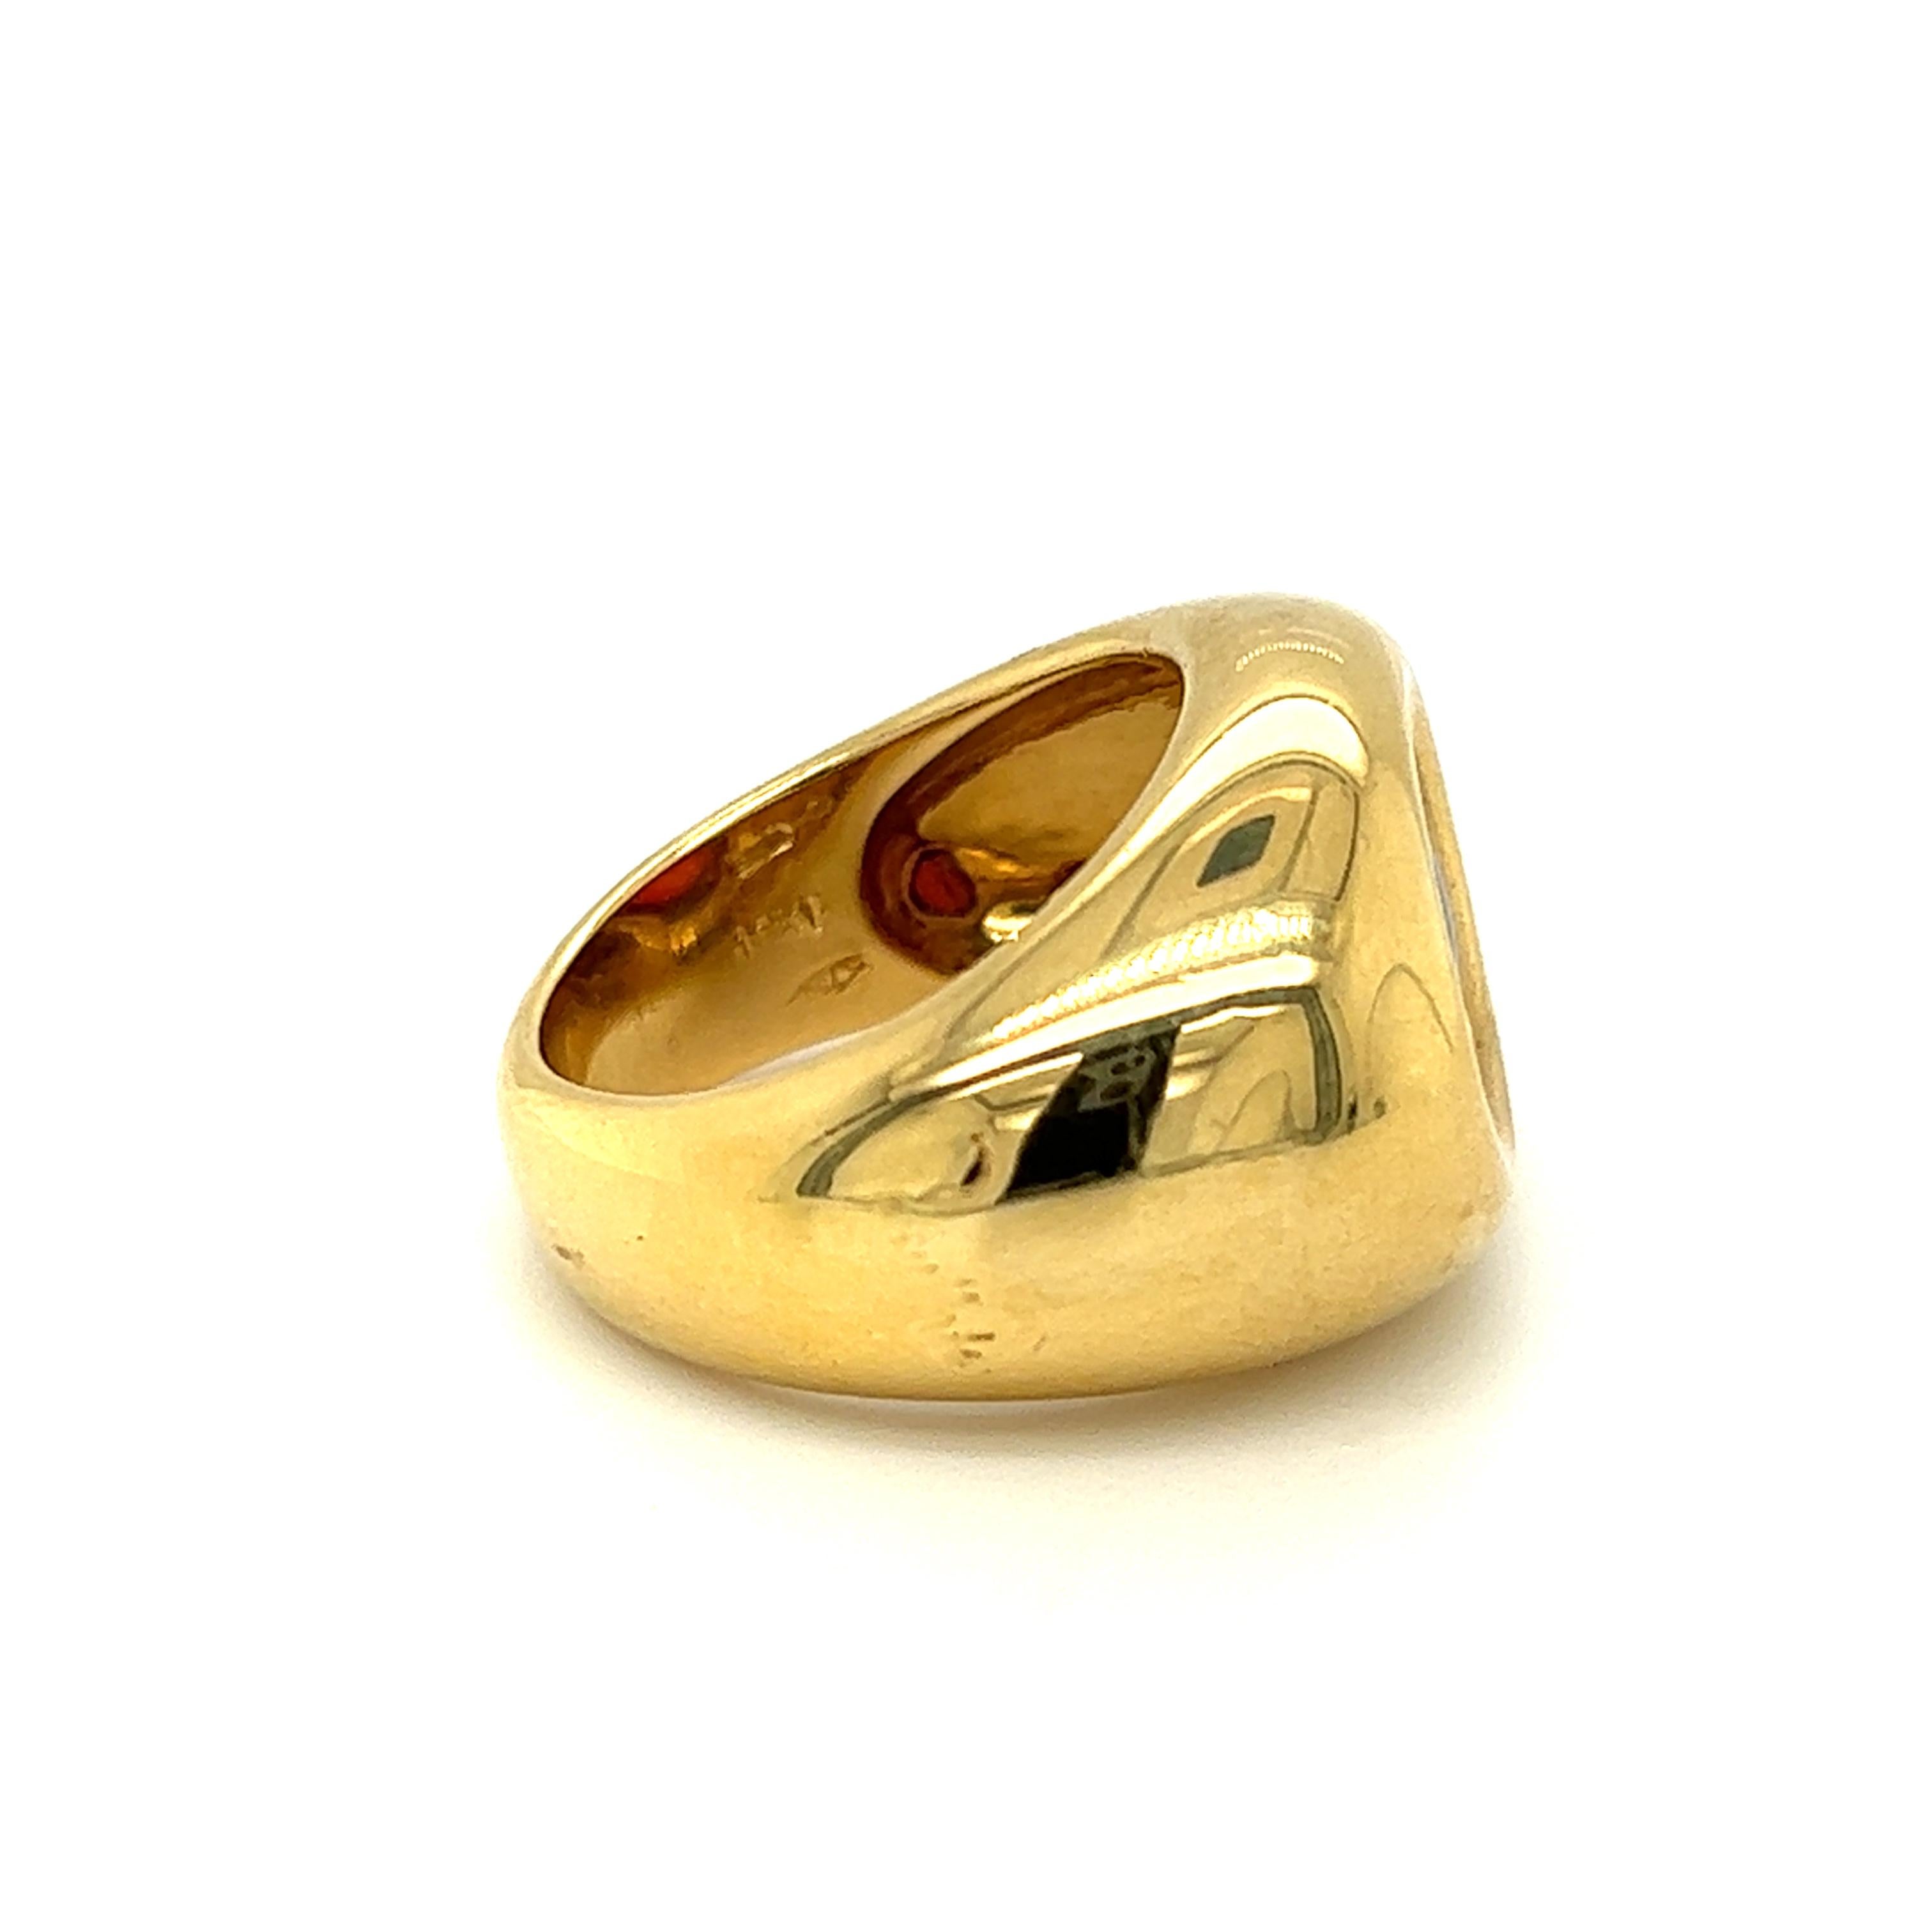 Contemporary Pomellato Citrine Carved Disc Ring in 18k Yellow Gold